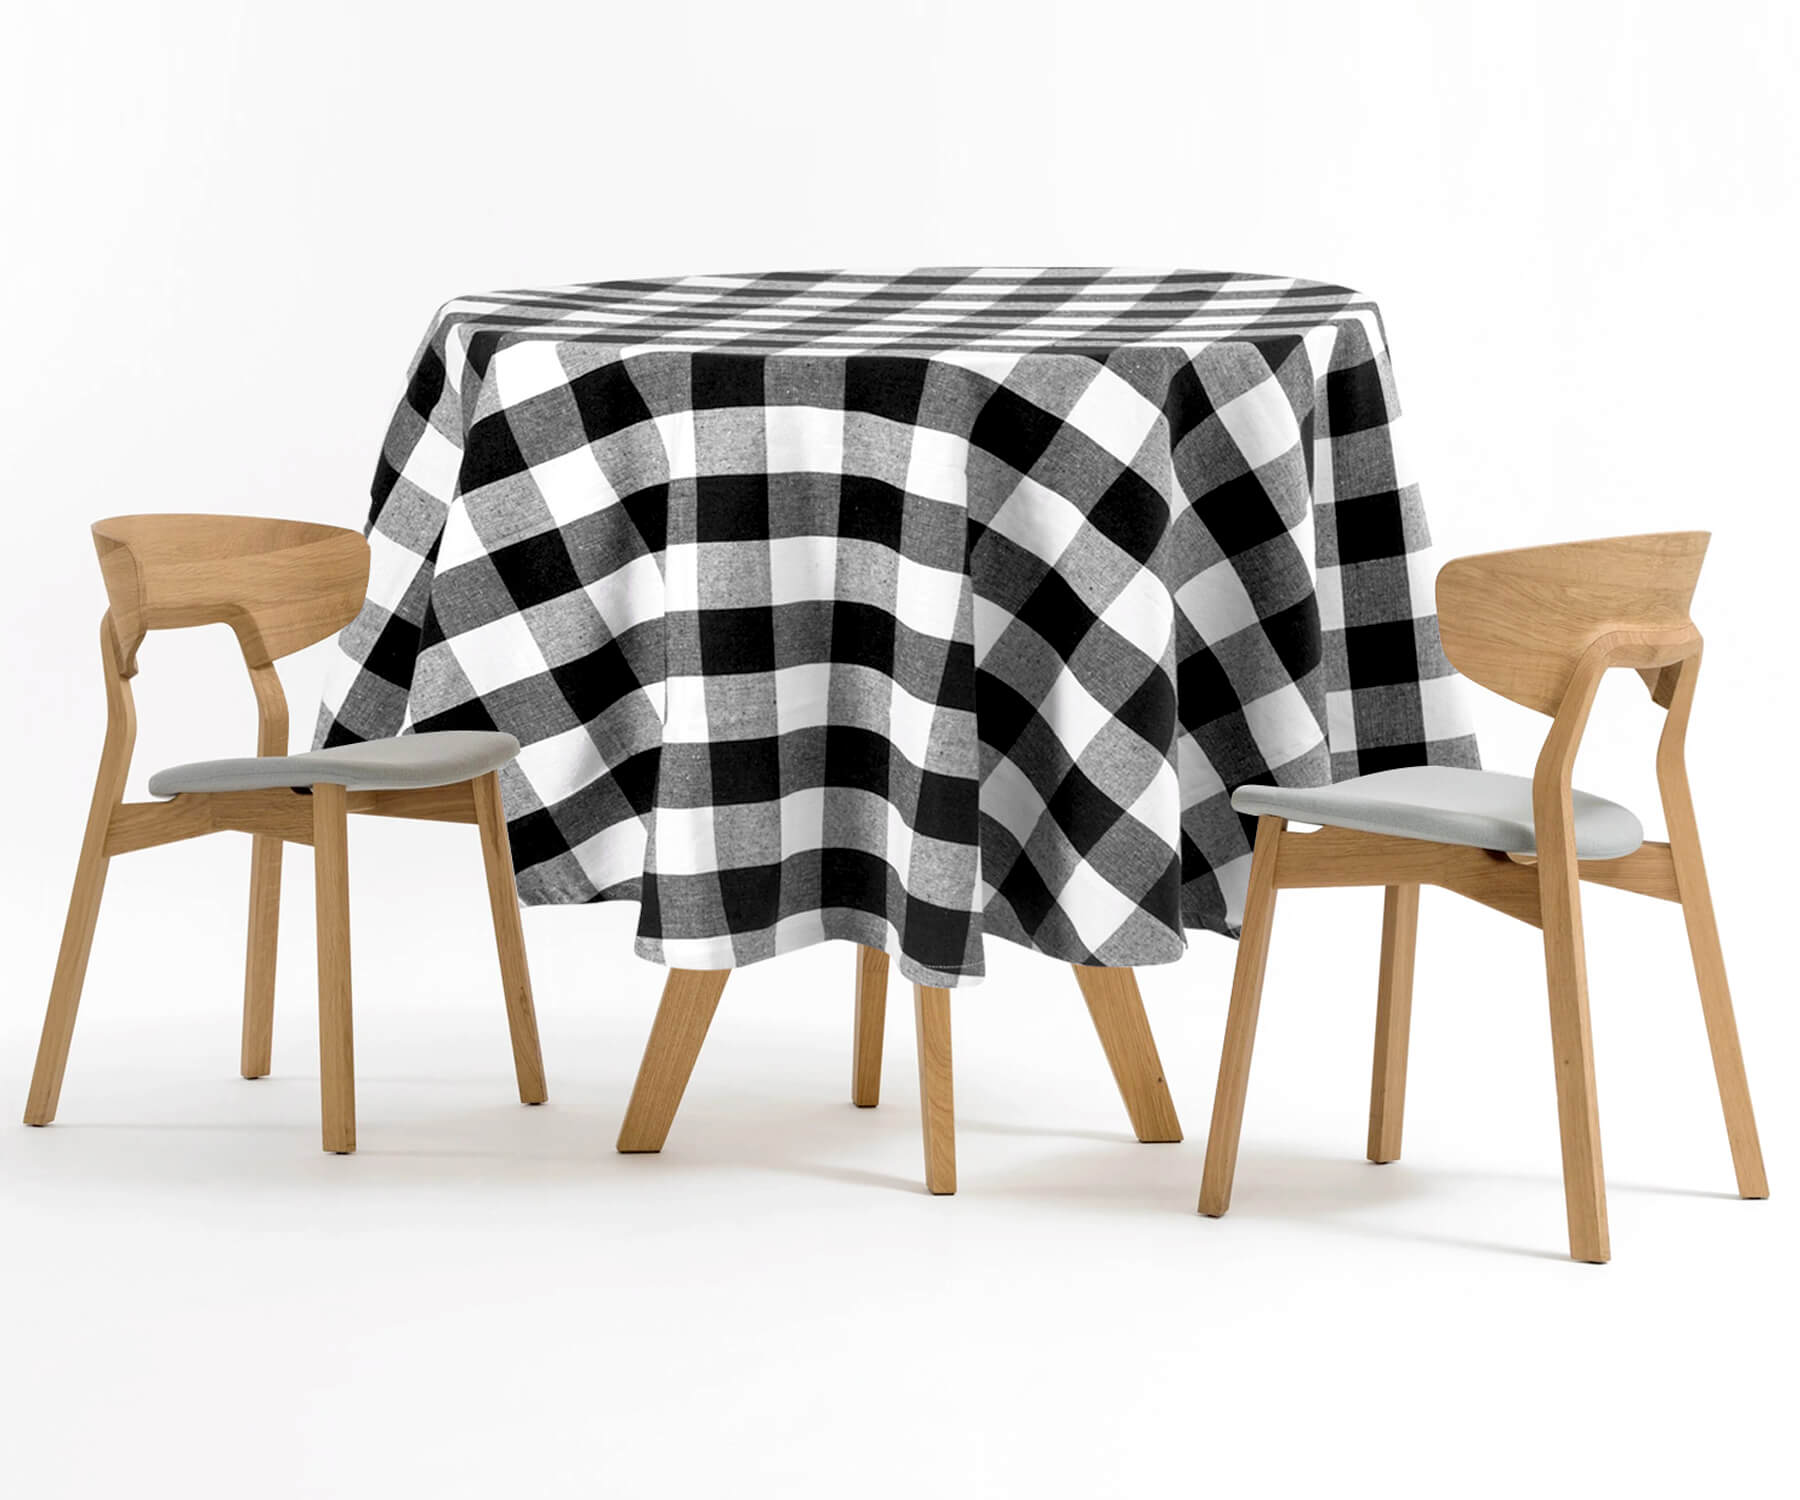 Round tablecloth with a checkered pattern, ideal for picnics